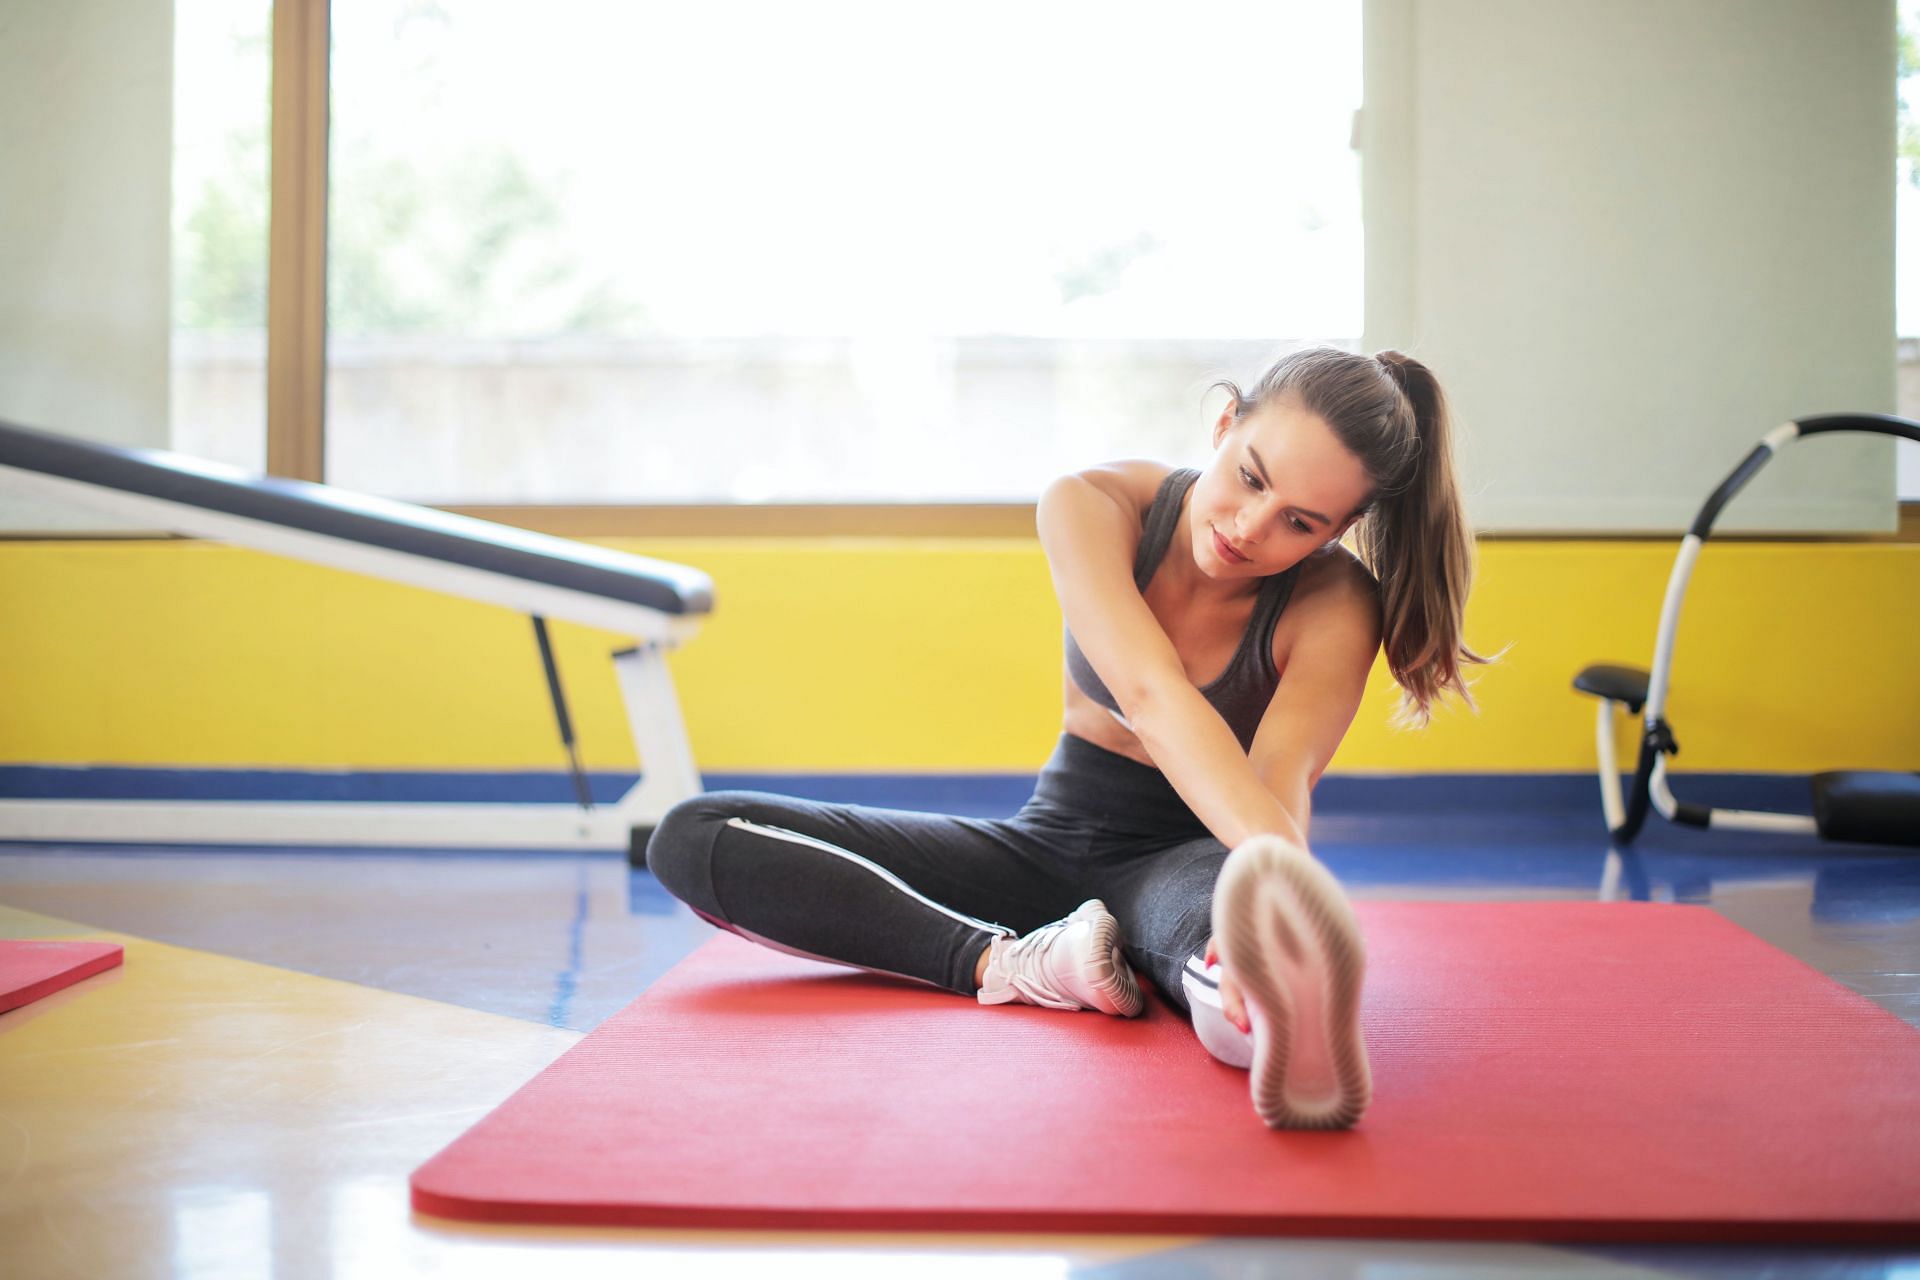 Pilates are a great form of exercise to strengthen and tone your body. (Image via Pexels / Andrea Piacquadio)